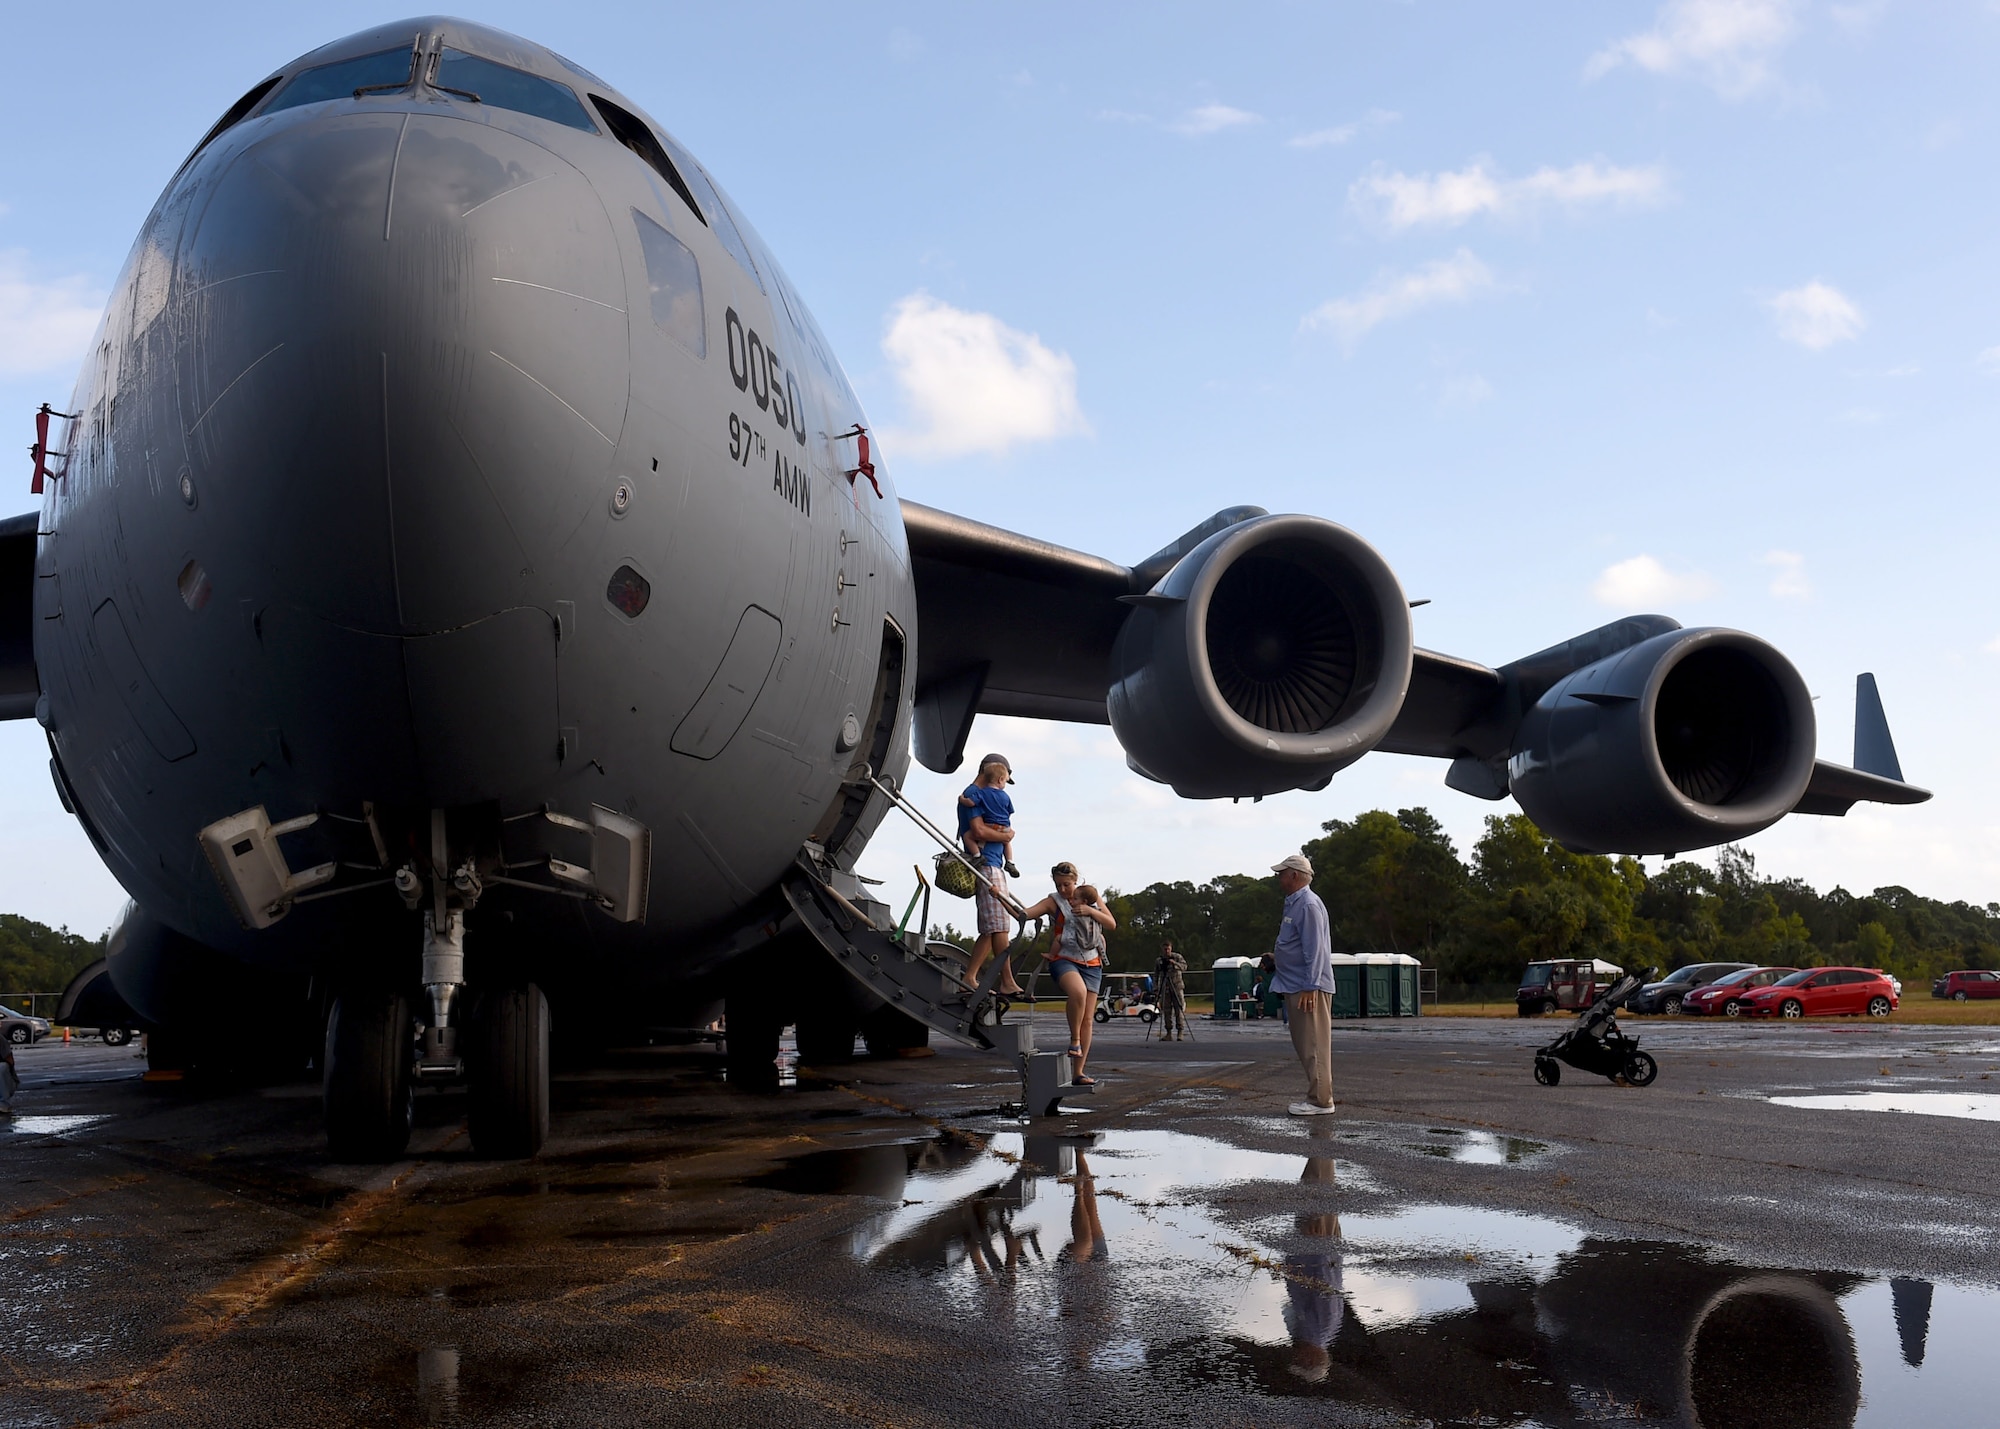 A U.S. Air Force C-17 Globemaster III cargo aircraft assigned to the 97th Air Mobility Wing, sits on a flight line during the 2016 Stuart Air Show, Nov. 4, 2016 at Stuart, Florida. The C-17 was set up as a static display during the air show to help educate attendees about its capabilities and the 97th AMW training mission. (U.S. Air Force photo by Senior Airman Franklin R. Ramos/Released)